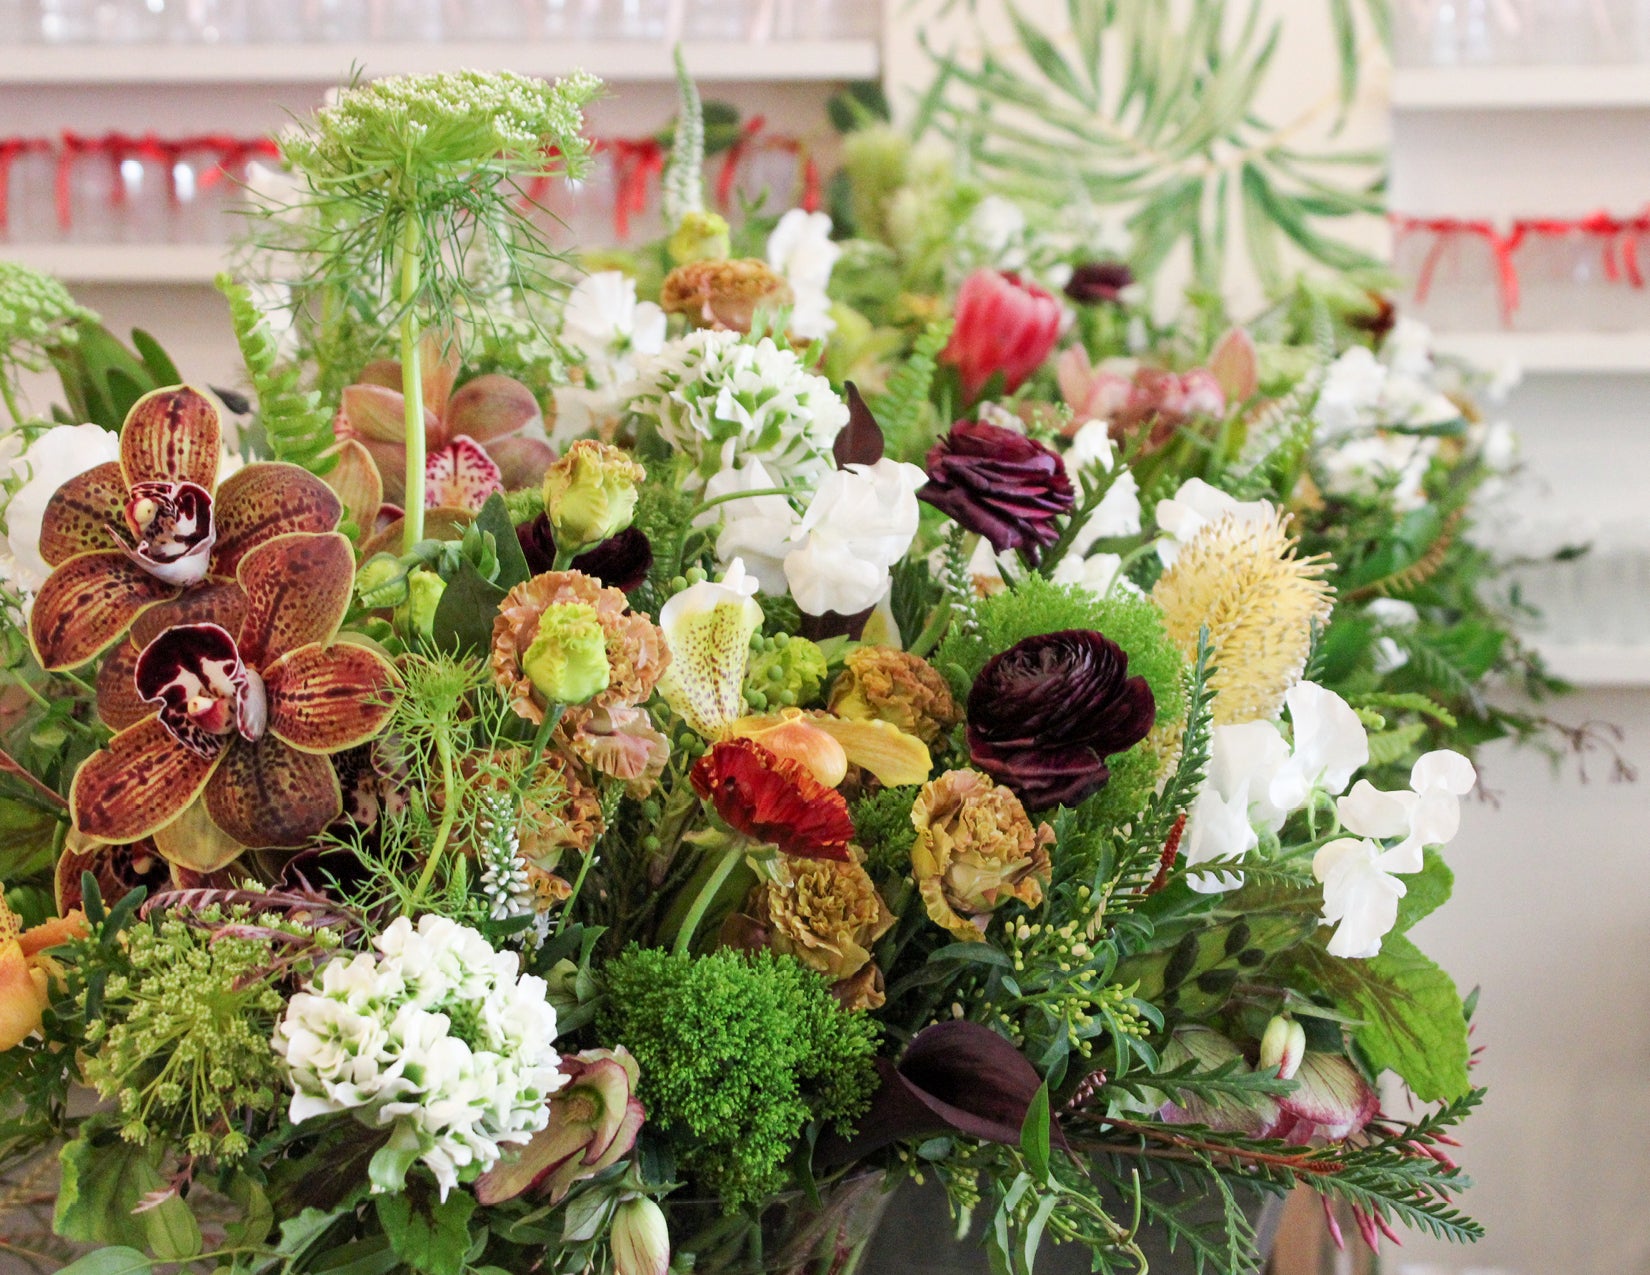 wildflora forest floor event flowers lush woodland orchid pincushion protea ranunculus green verde yellow red purple violet mauve white queen anne's lace pitcher plant sweet pea peacock foliage leaf fern fairytale faerie wedding